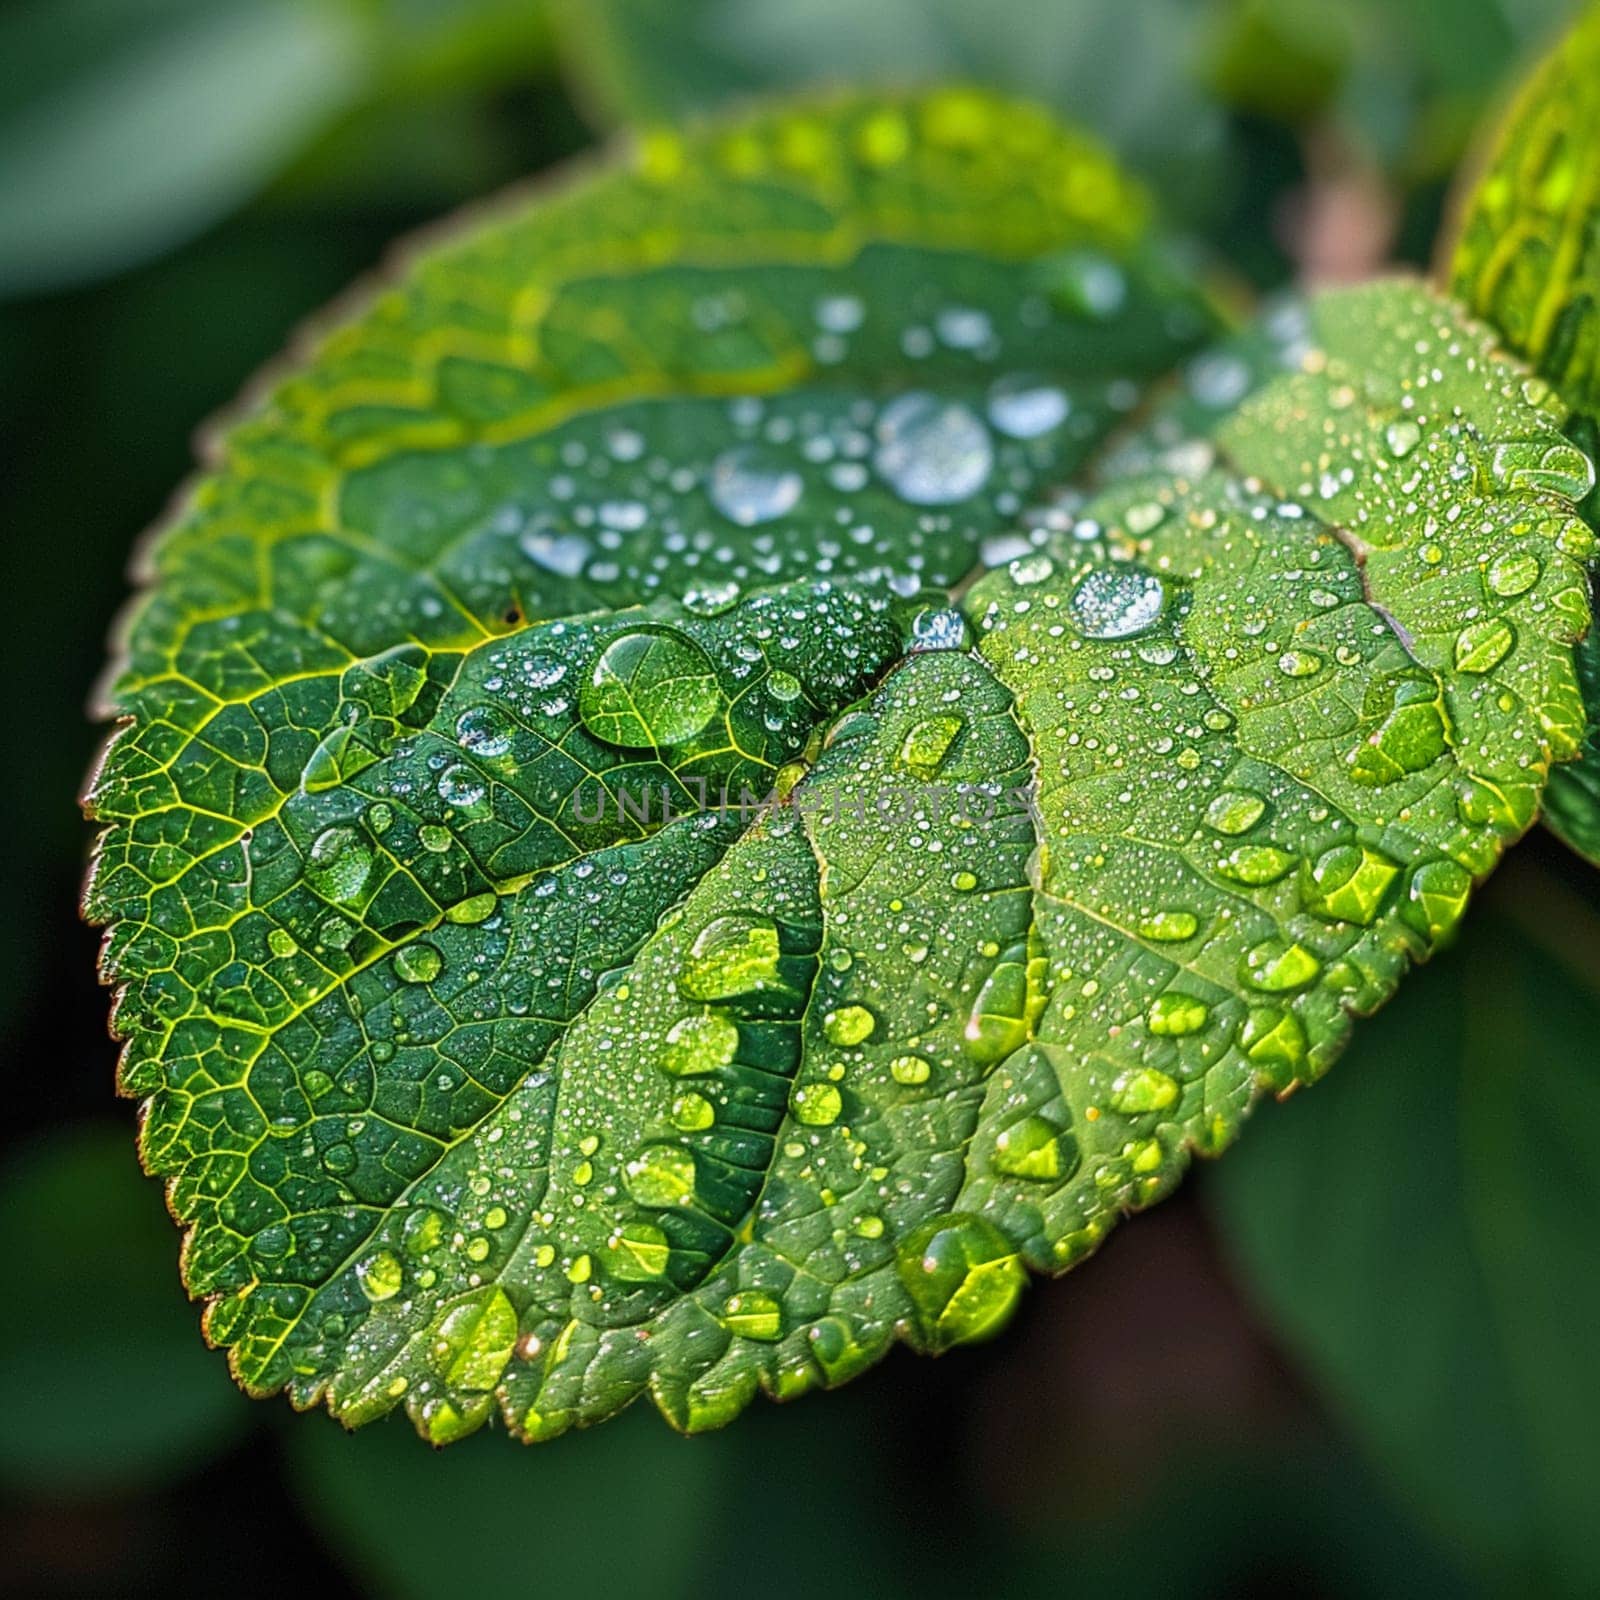 Close-up of raindrops on a vibrant green leaf by Benzoix